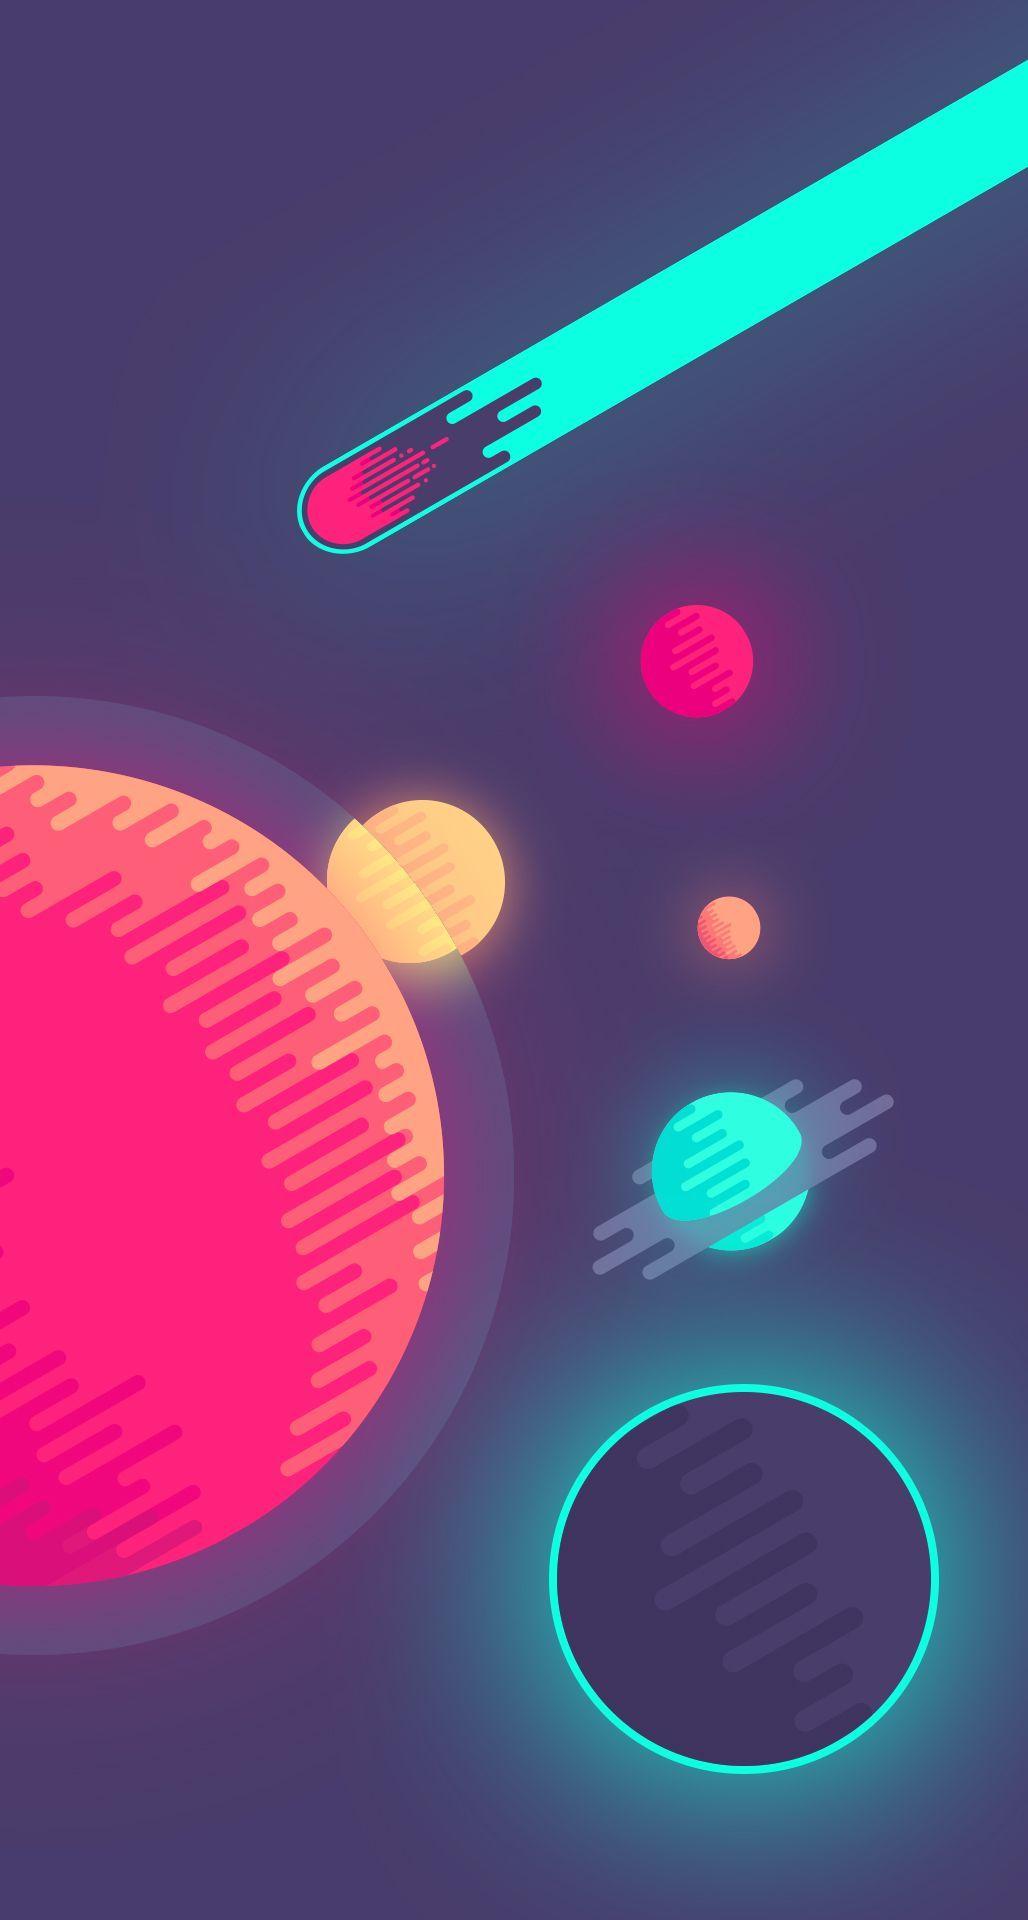 Sharing my space wallpaper. Hipster wallpaper, Hipster phone